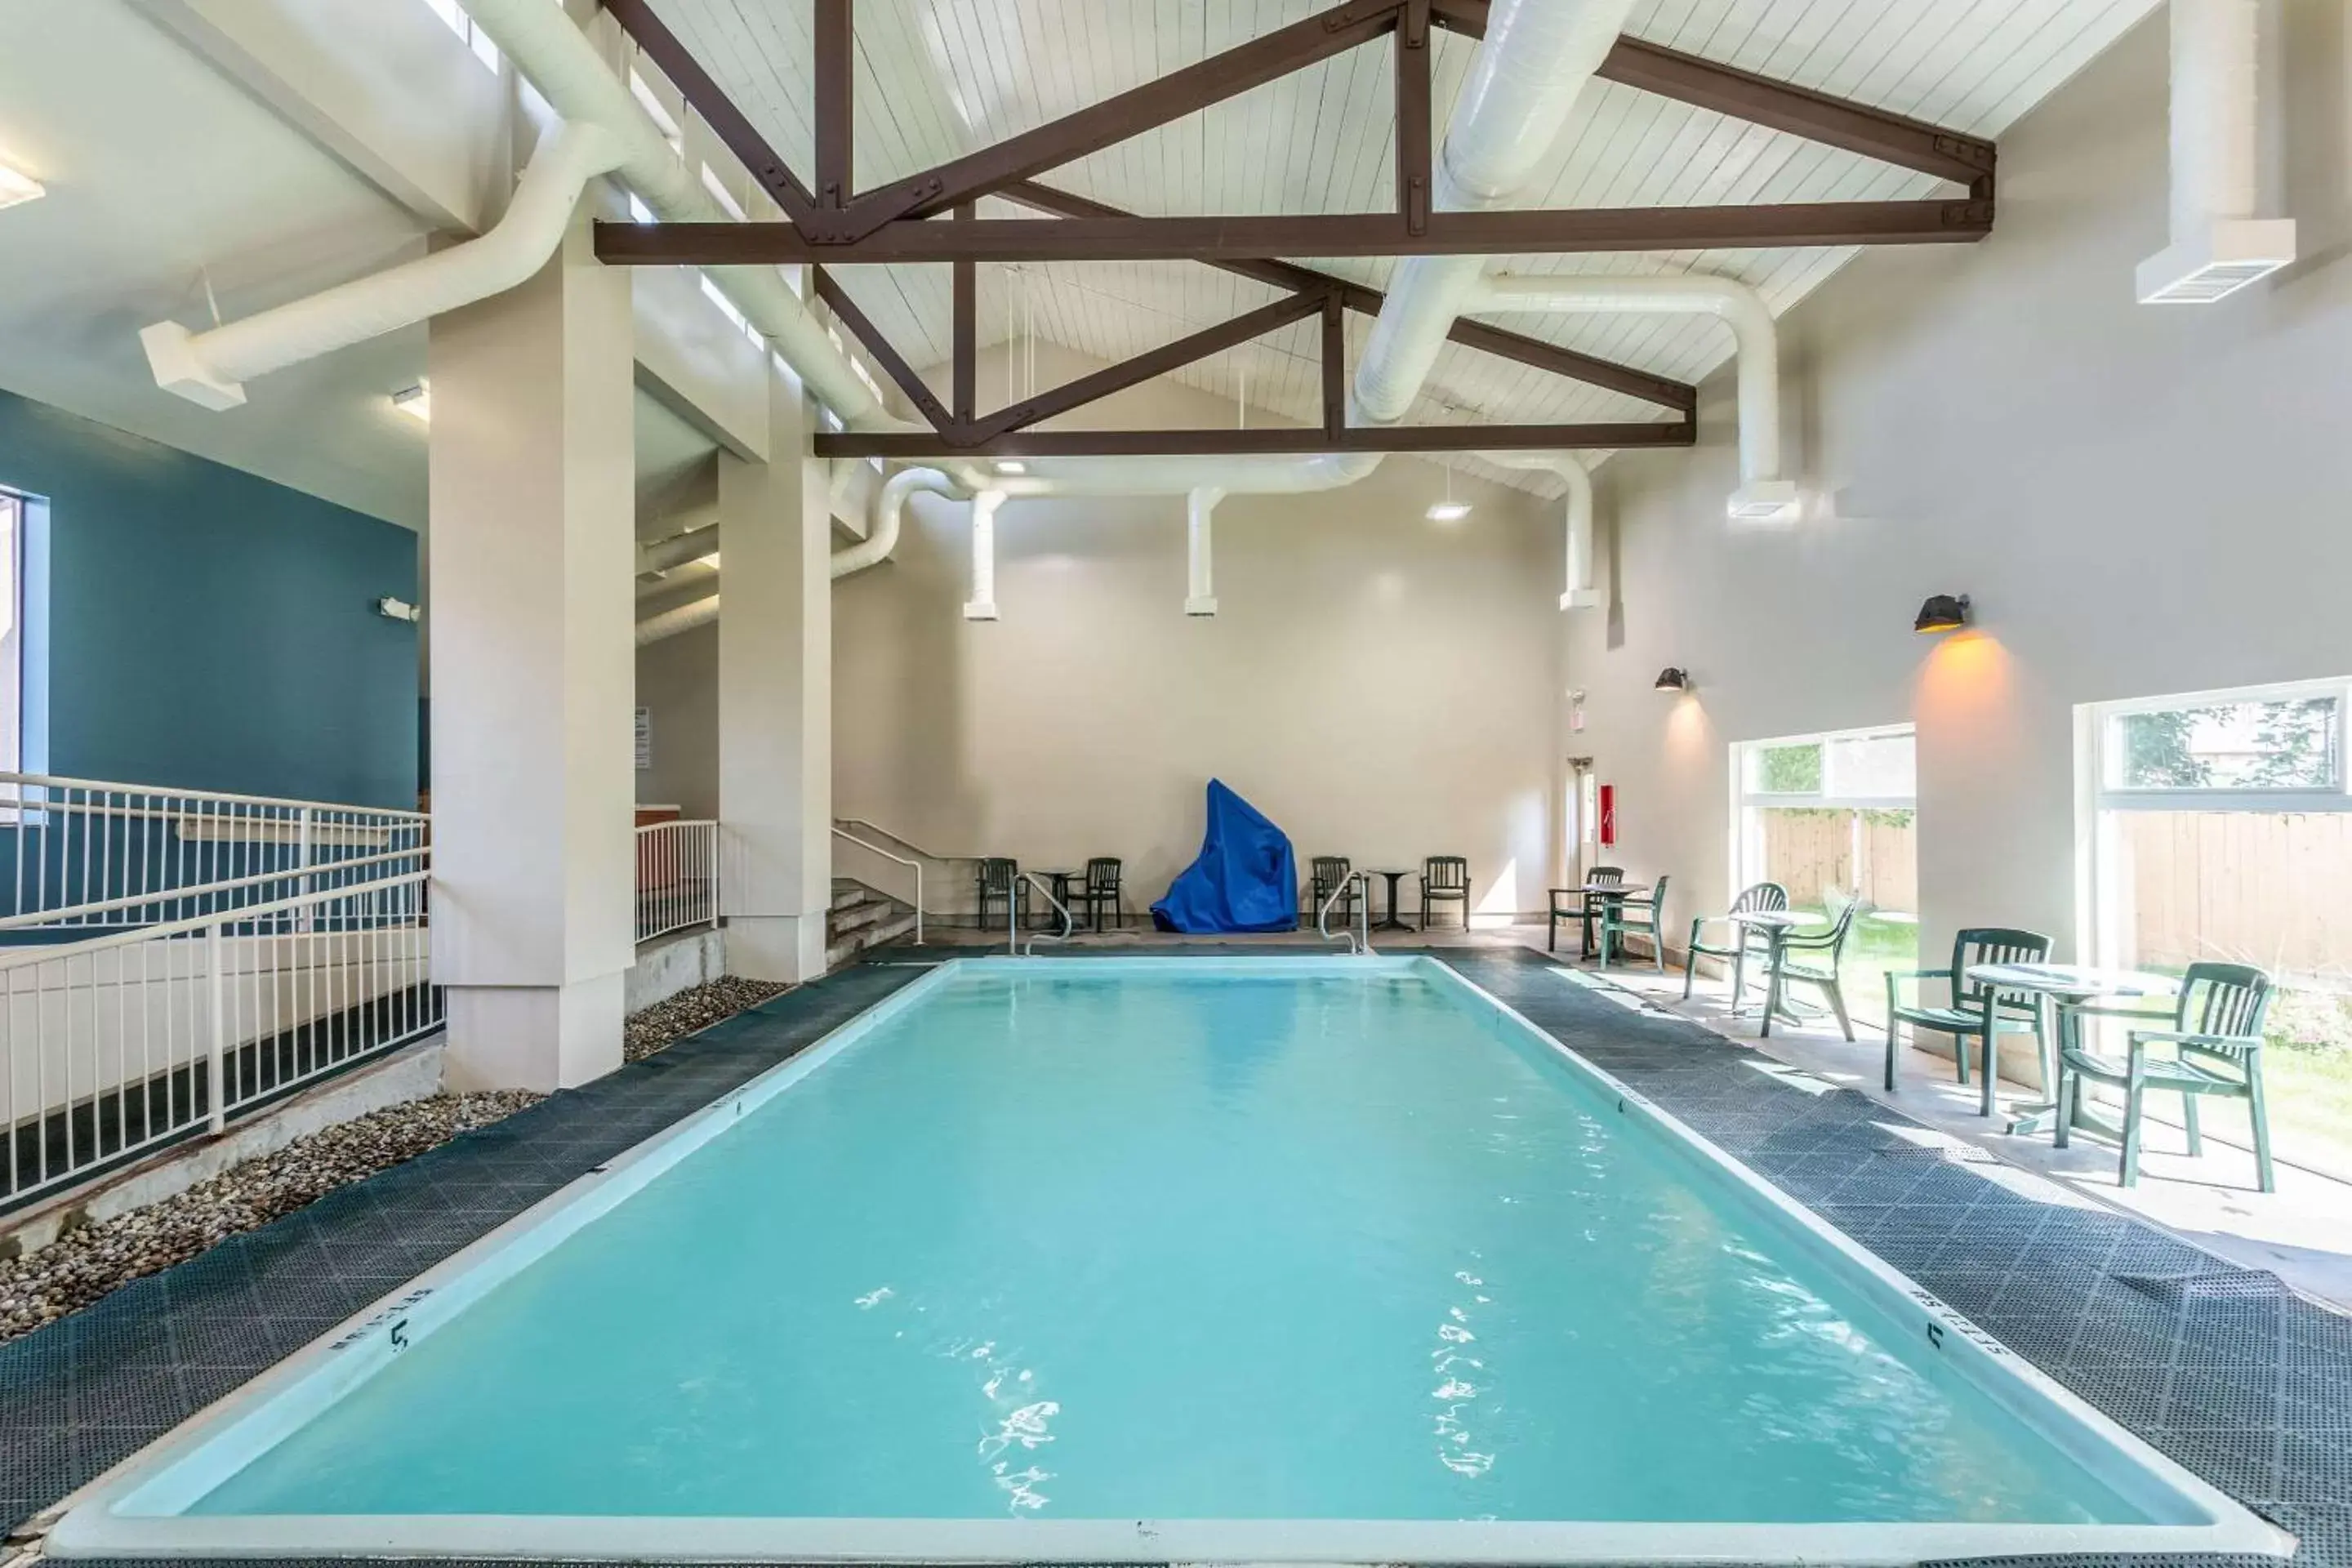 On site, Swimming Pool in Quality Inn & Suites Coeur d'Alene